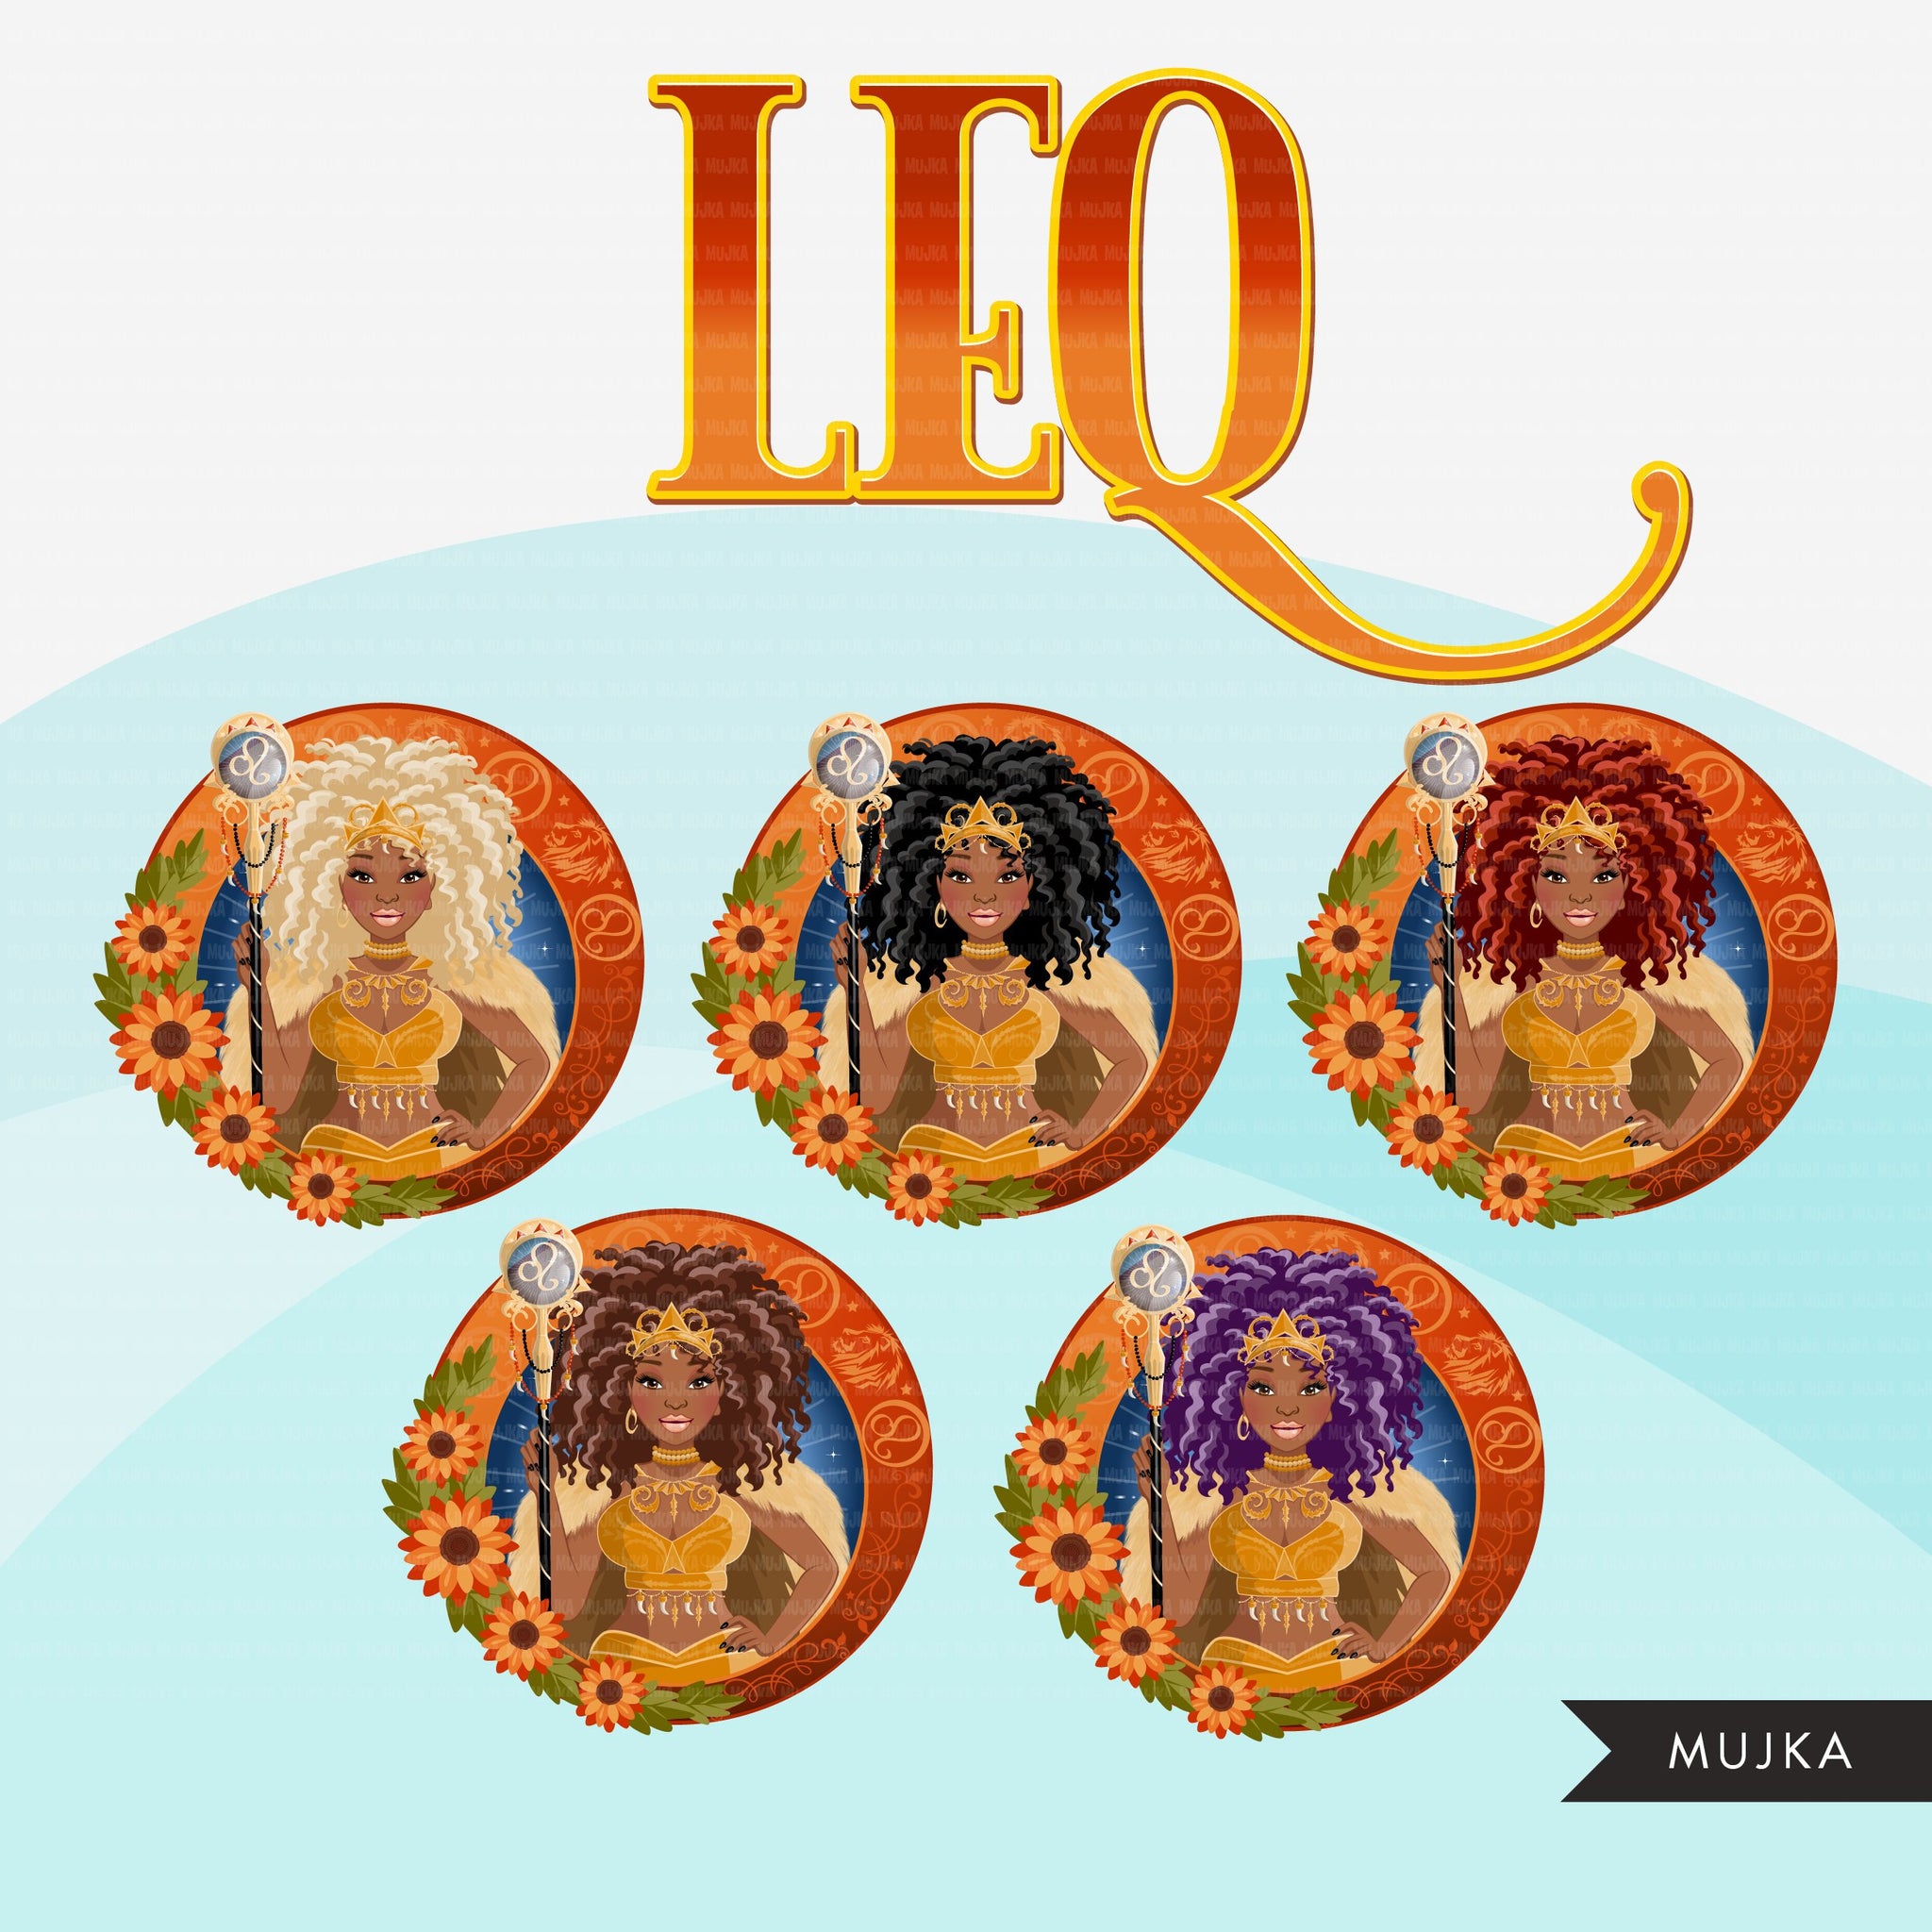 Zodiac Leo Clipart, Png digital download, Sublimation Graphics for Cricut & Cameo, Black Curly hair Woman Horoscope sign designs